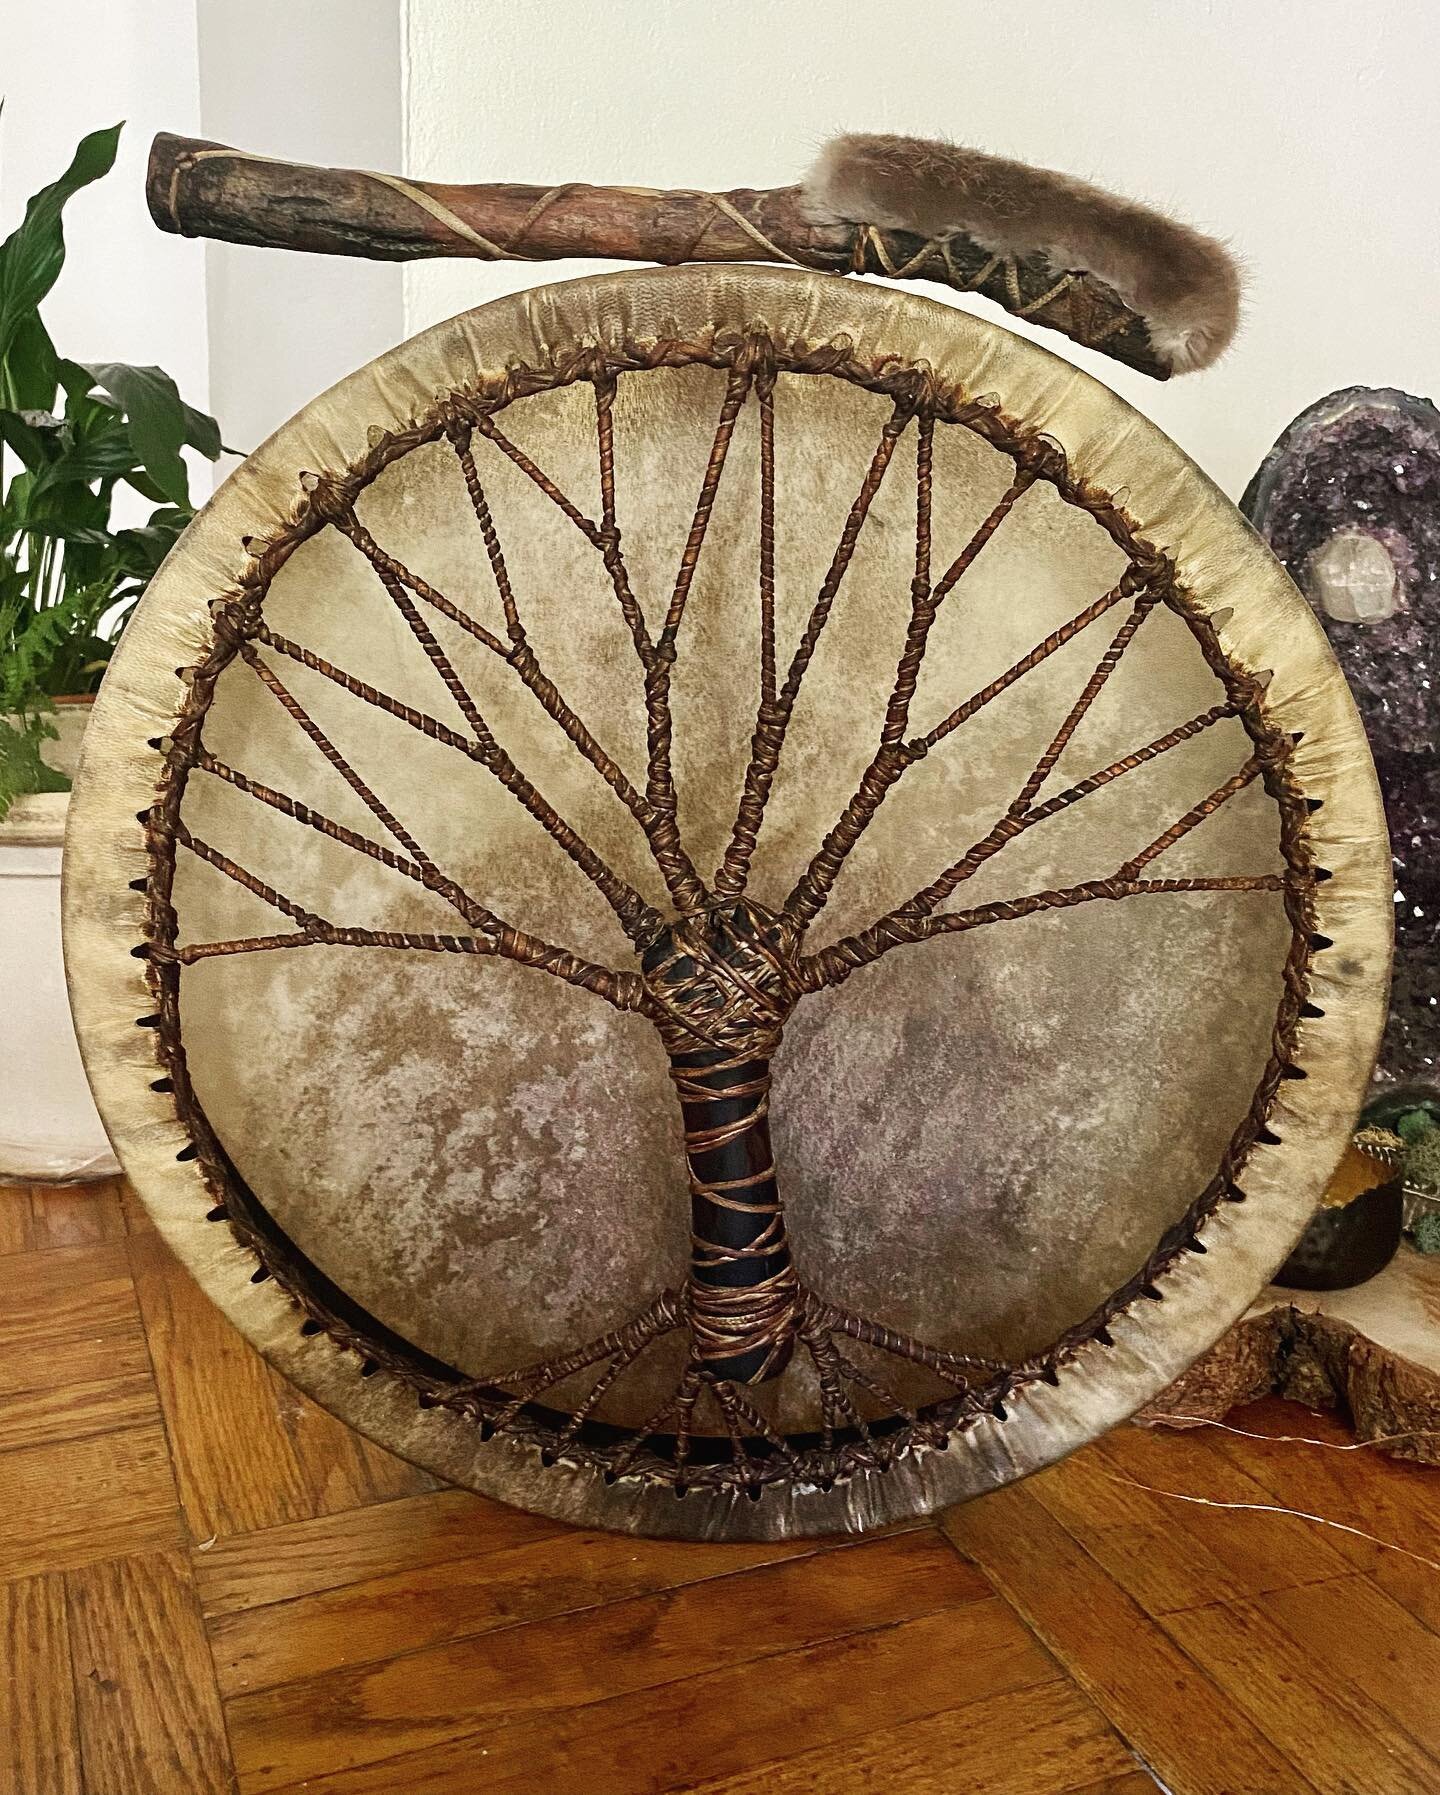 Welcoming this new drum ally into my musical family&hellip;

Rich low tones, whisper it&rsquo;s Spirit. 

The stunning variegated hide. 

The exquisite binding, a tree rooted in the  earths pulse, unfurling its branches, holding. 

This level of drum